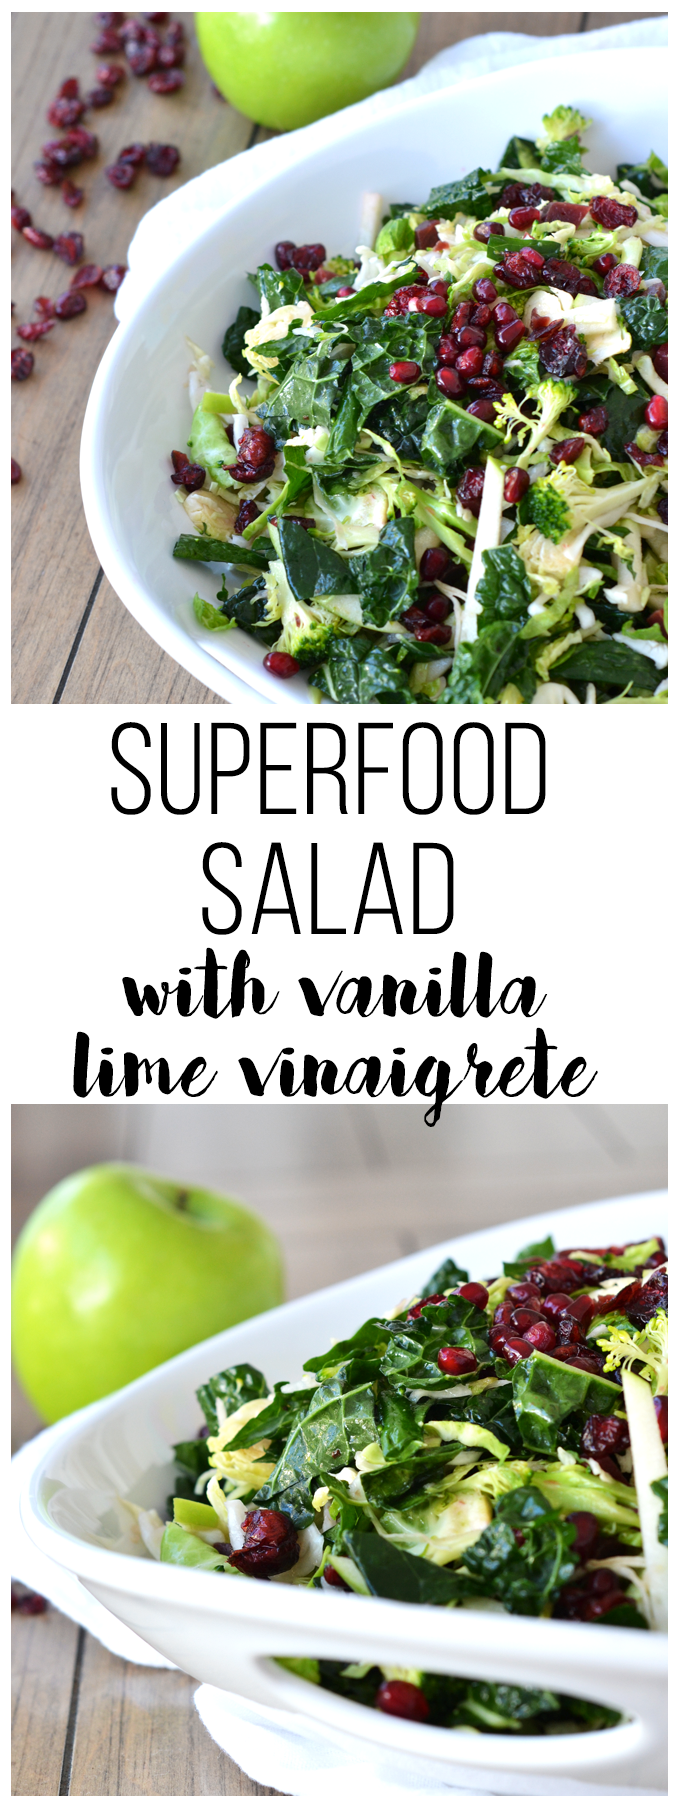 This Superfood Salad is packed with tons of nutrients and coated with a Vanilla Lime Vinaigrette! Paleo & Whole30 compliant!